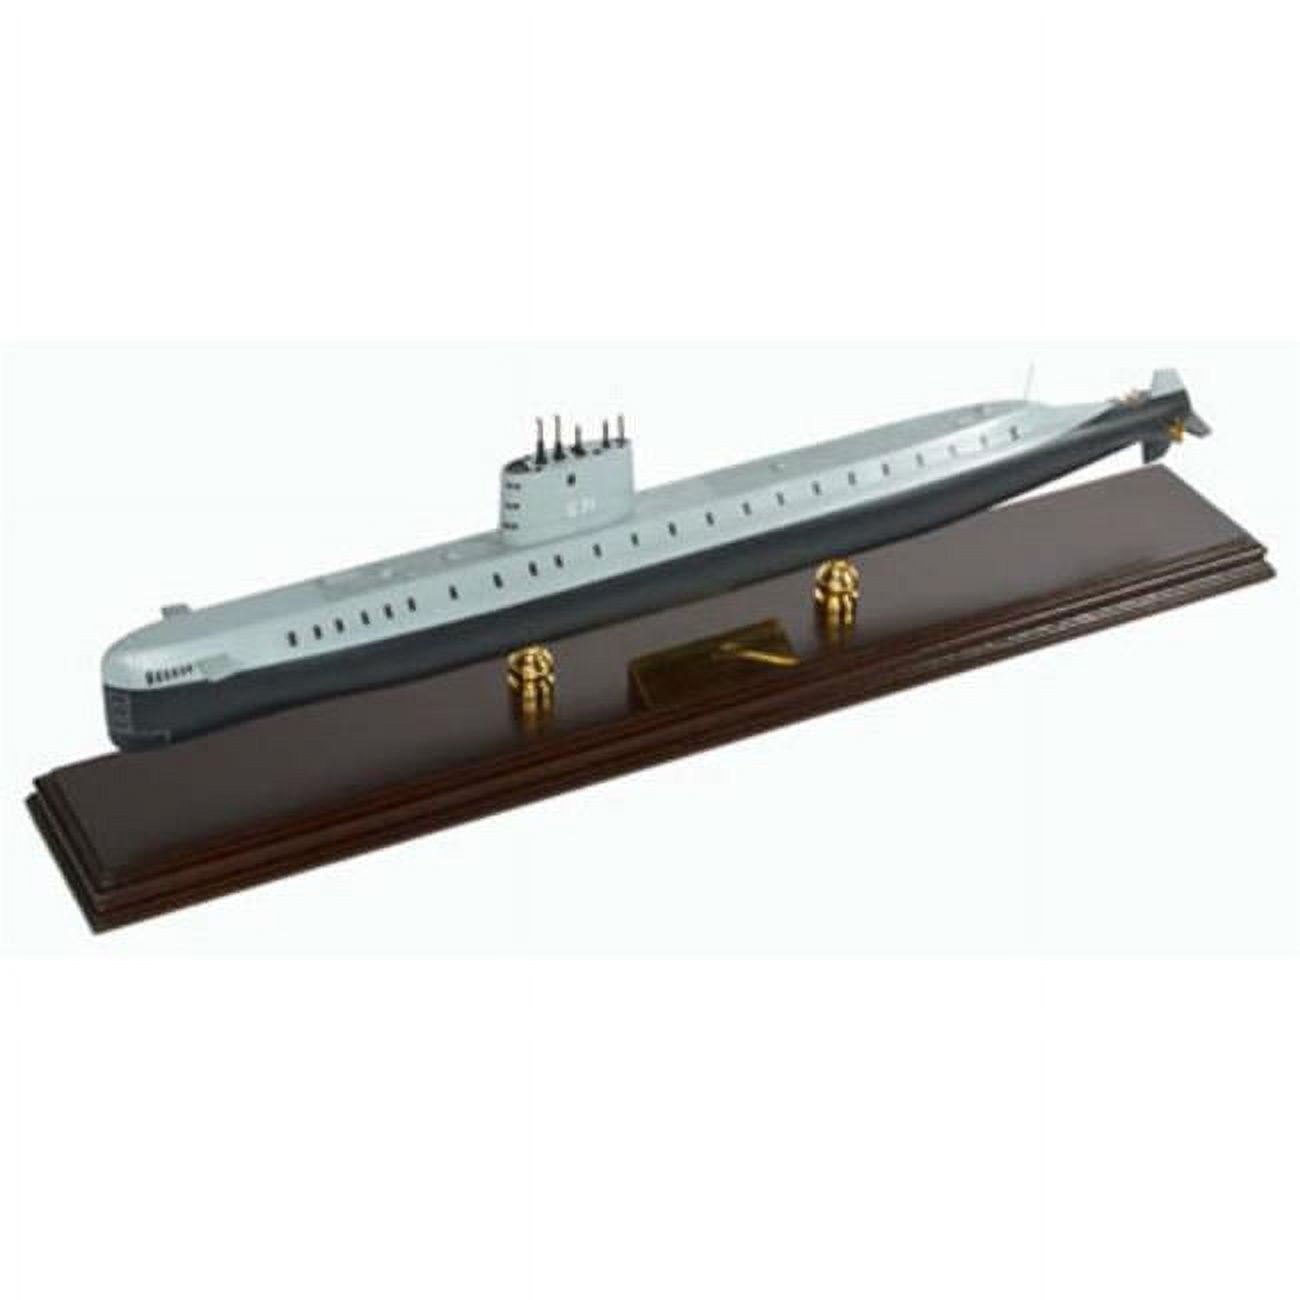 Picture of Executive Series Display Models SCMCS017 USS Nautilus SSN 571 1 by 150 - MBSN1T